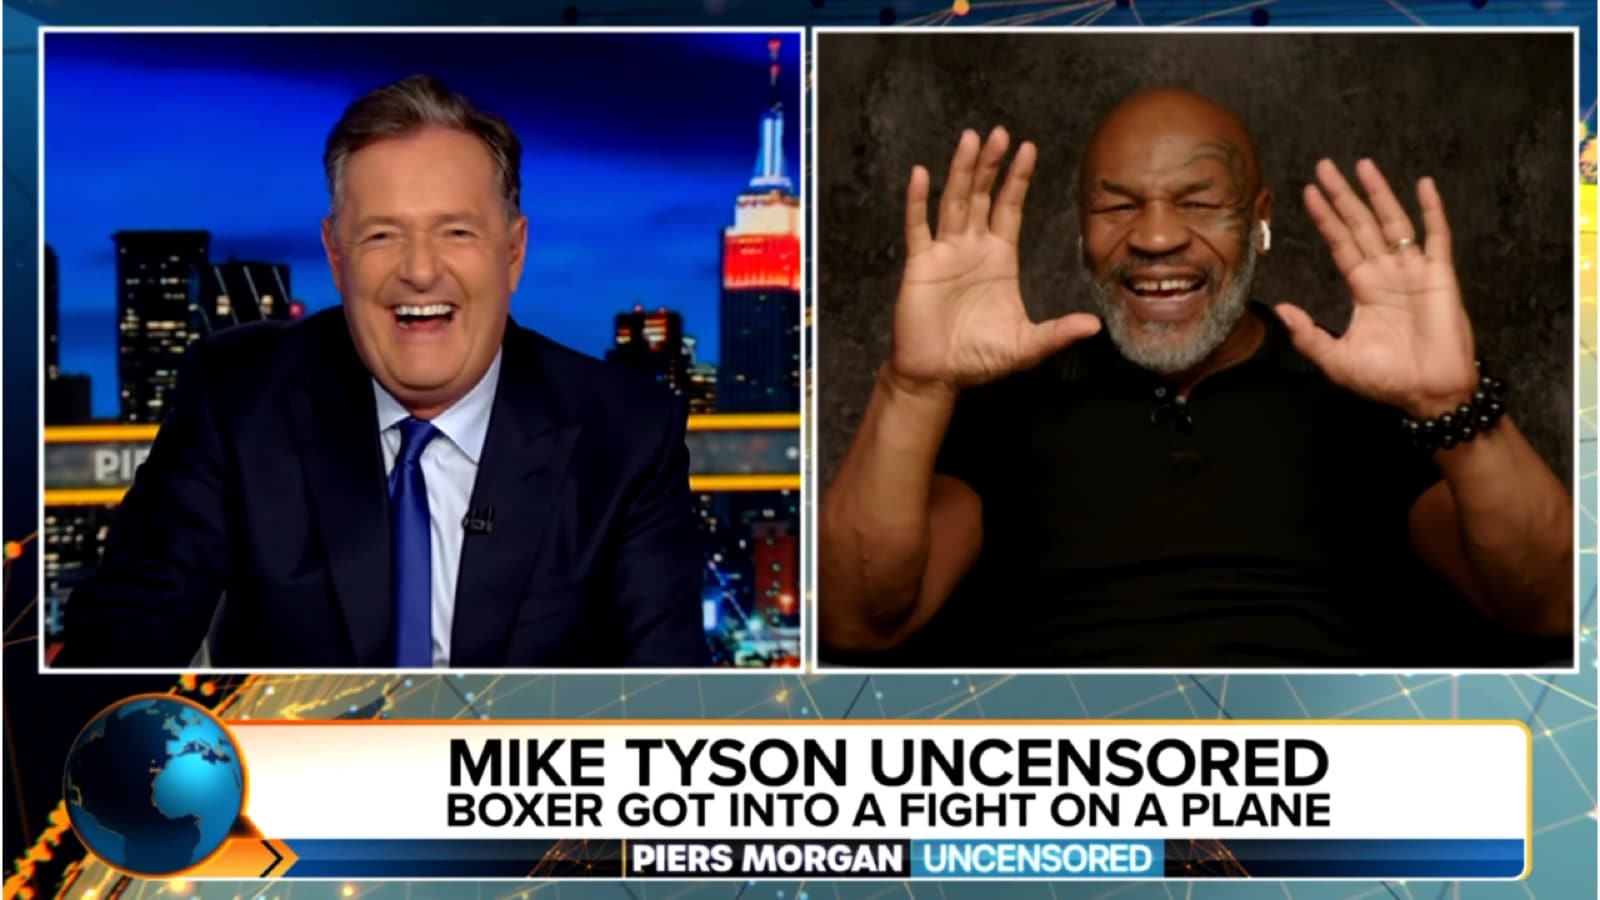 Piers Morgan Uncensored: Boxing Legend Mike Tyson Talks About Trump, His Wife’s Influence & His Recent Plane Bust Up - Boxing Image